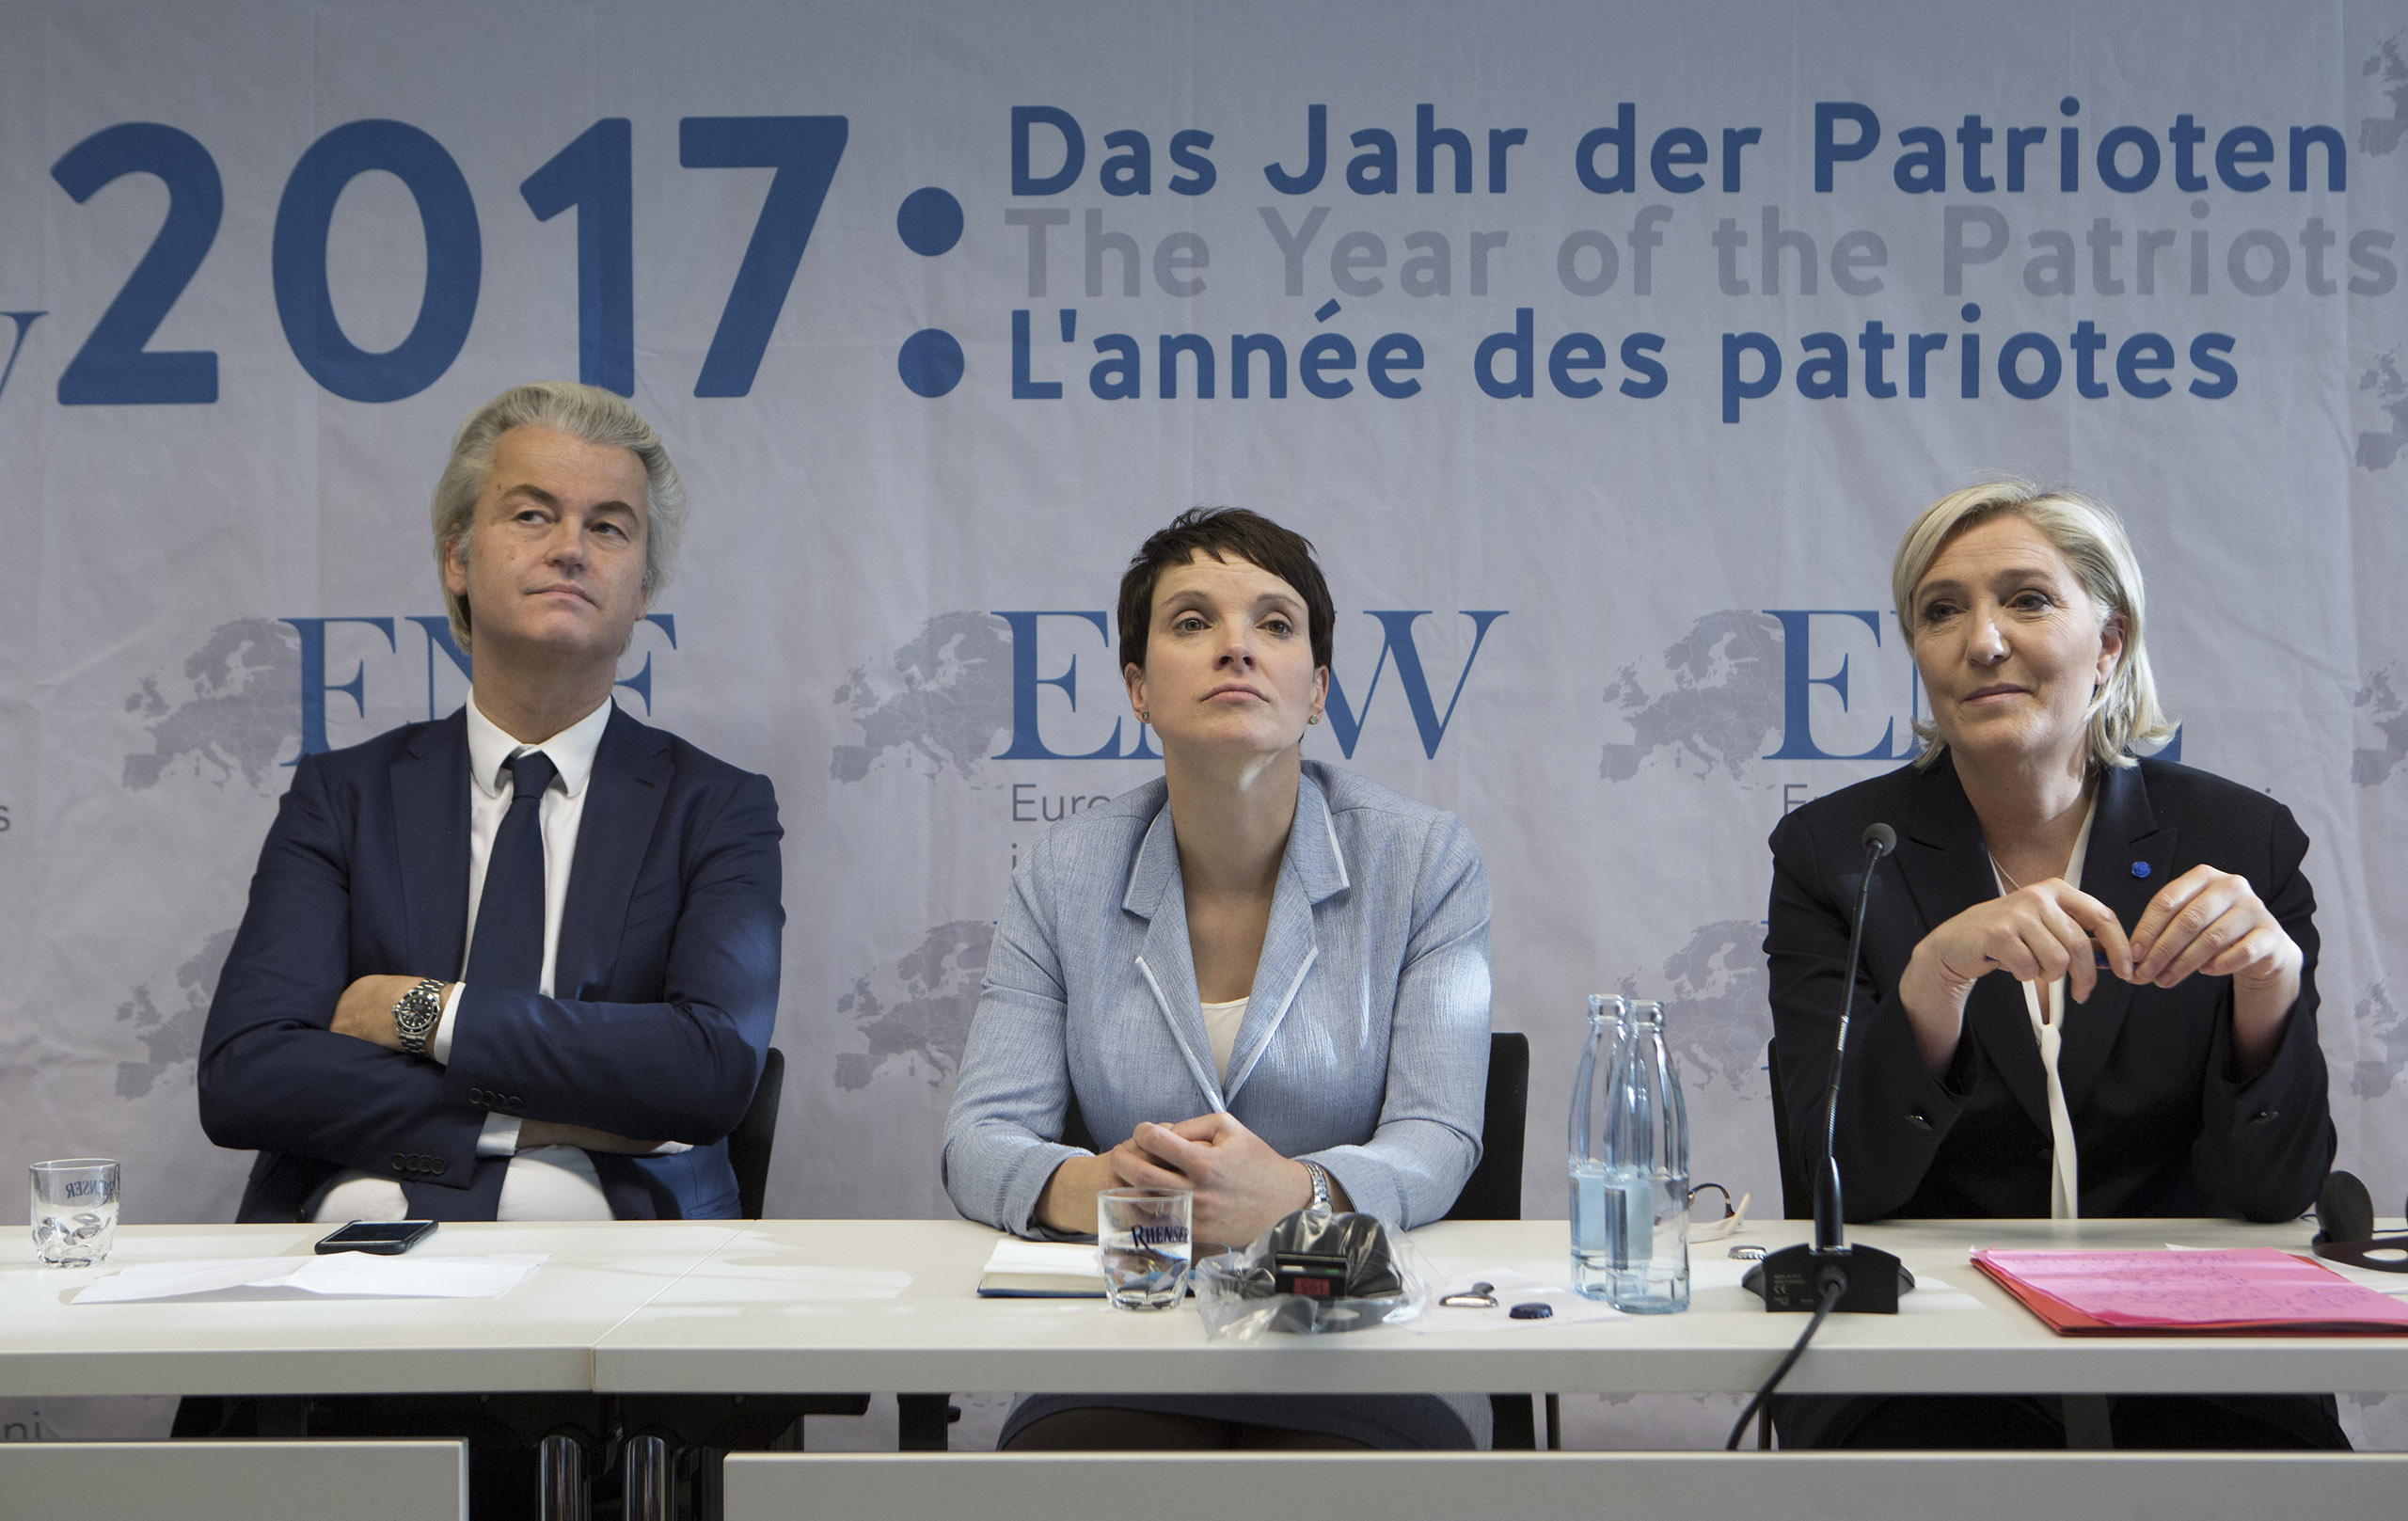 From left: Geert Wilders, chairman of the Dutch Party of Freedom; Frauke Petry, chairwoman of the Alternative for Germany party; and Marine Le Pen, chairwoman of the French National Front, attend a press conference in Koblenz, Germany, on Jan. 21, 2017 (Ulrich Baumgarten—Getty Images)